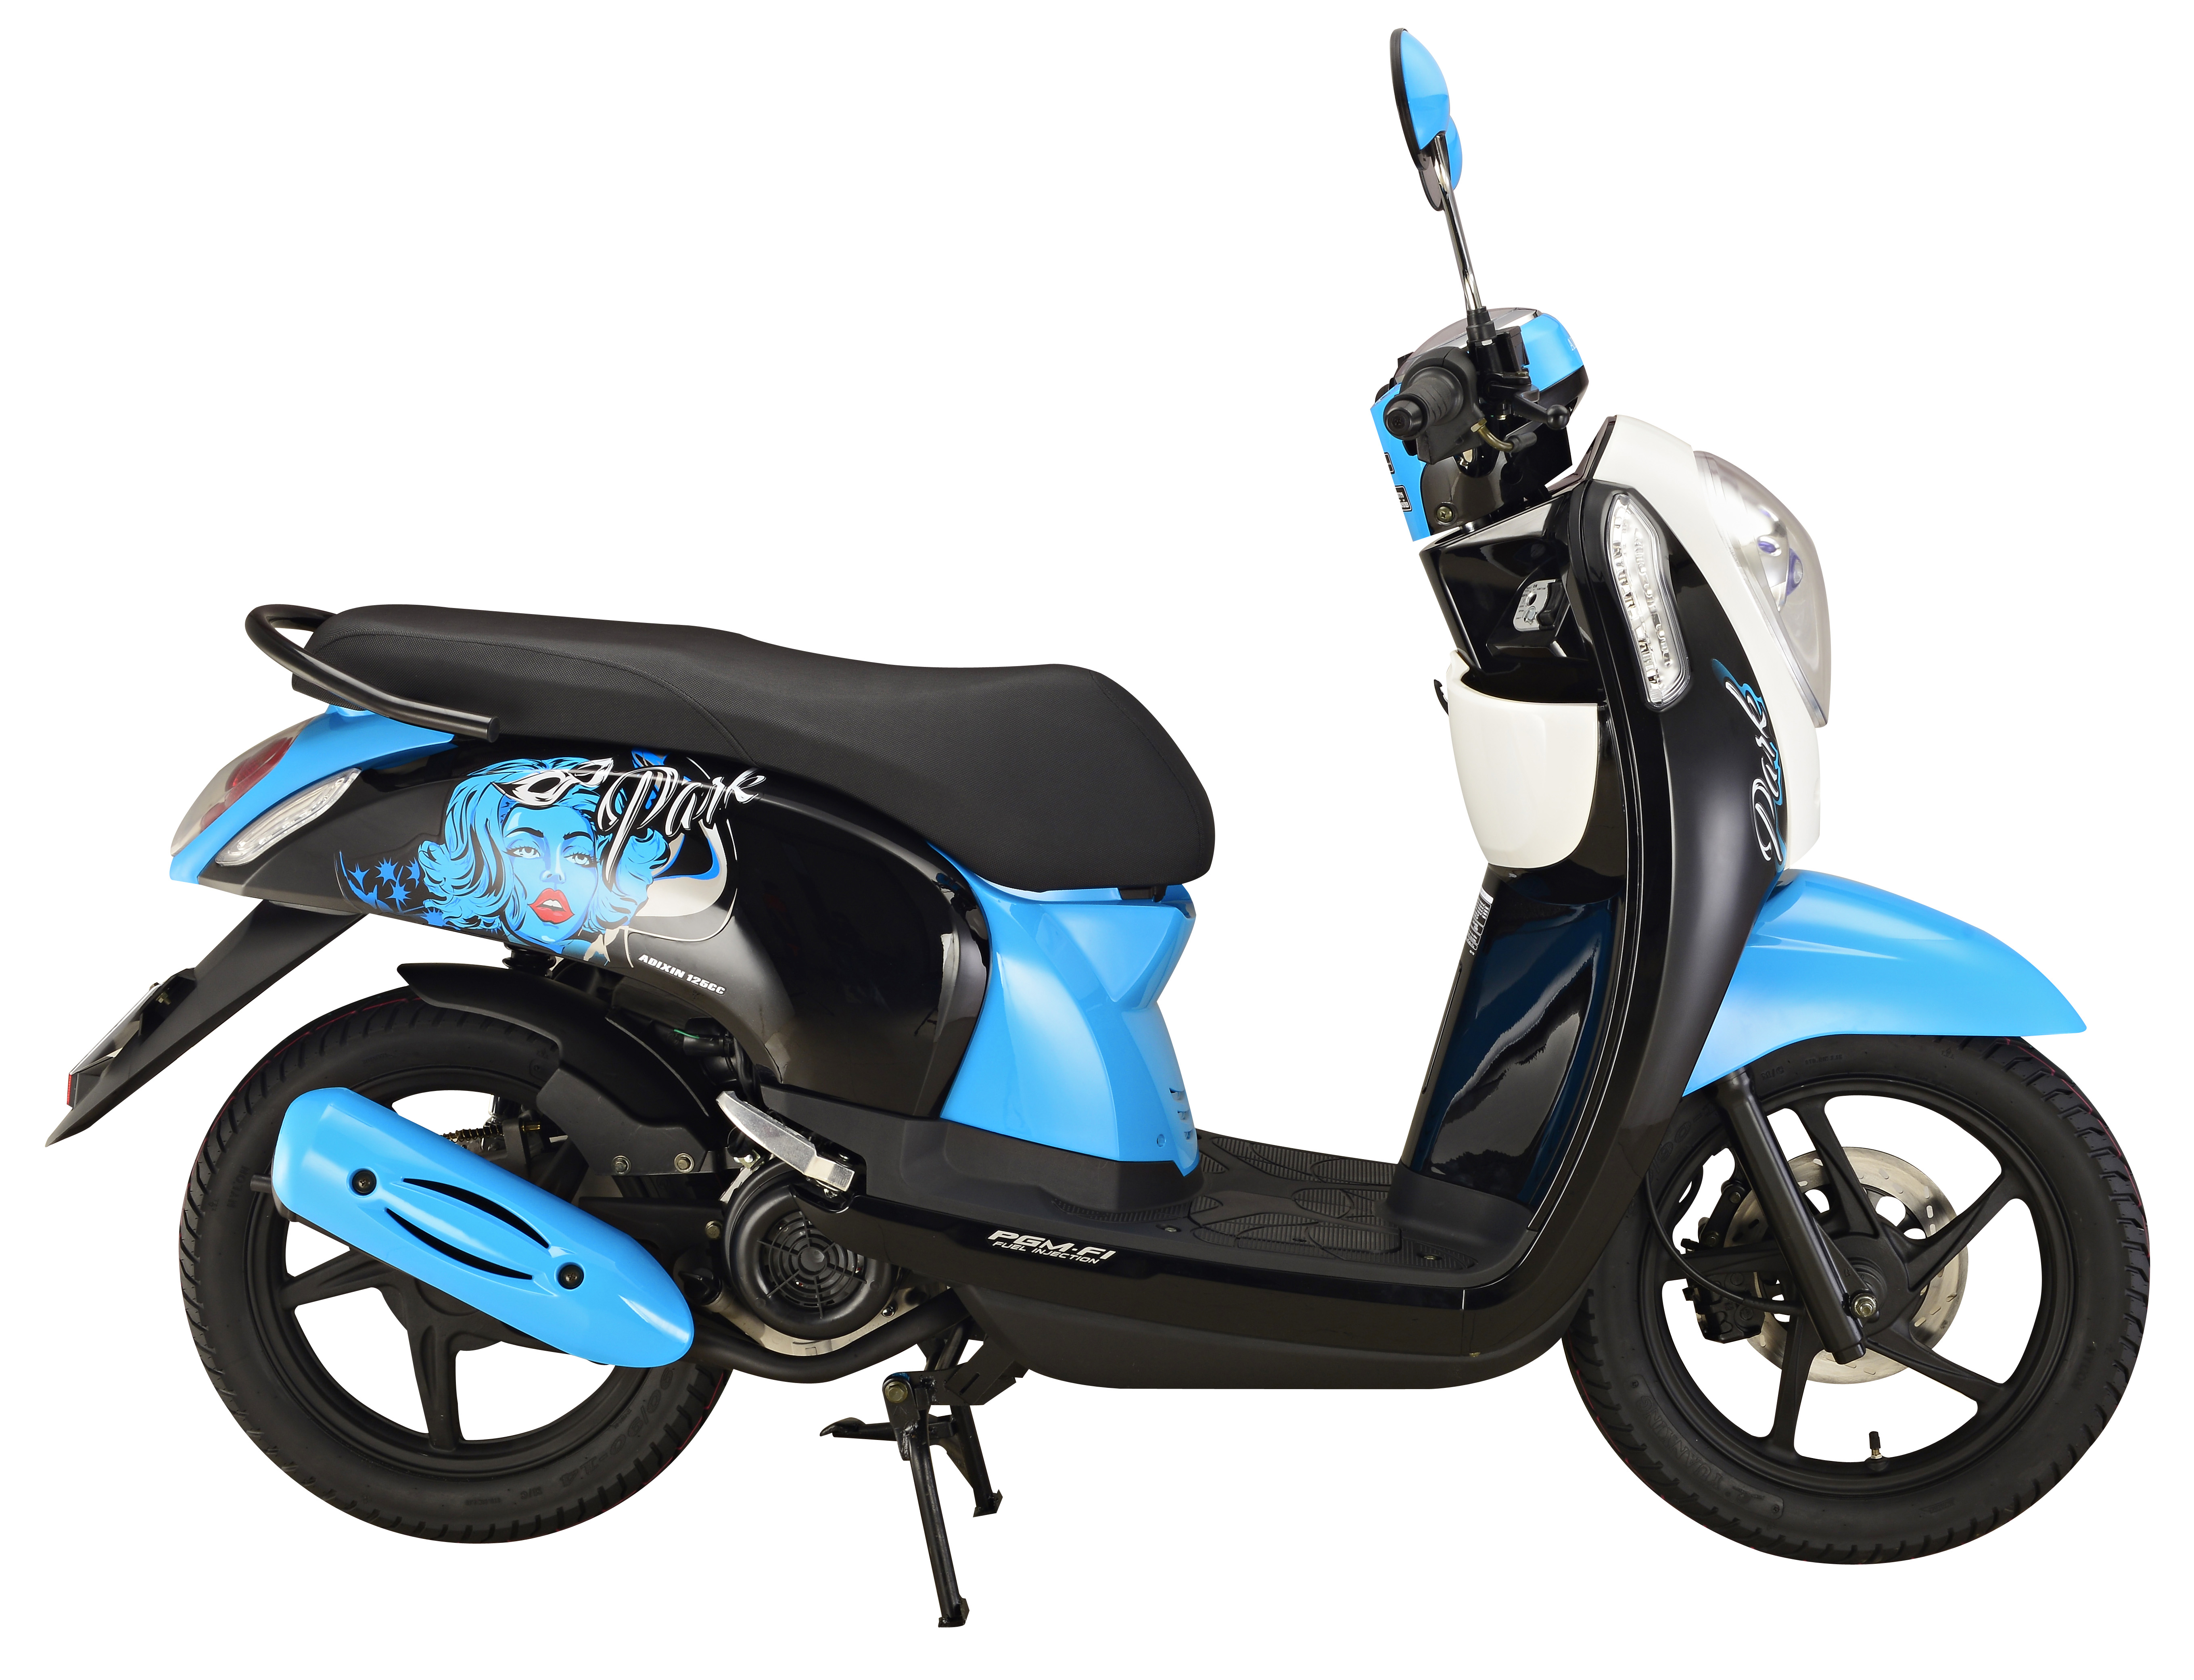 FINO style Classic 125cc Geely Motorcycle Scooter CCC CE